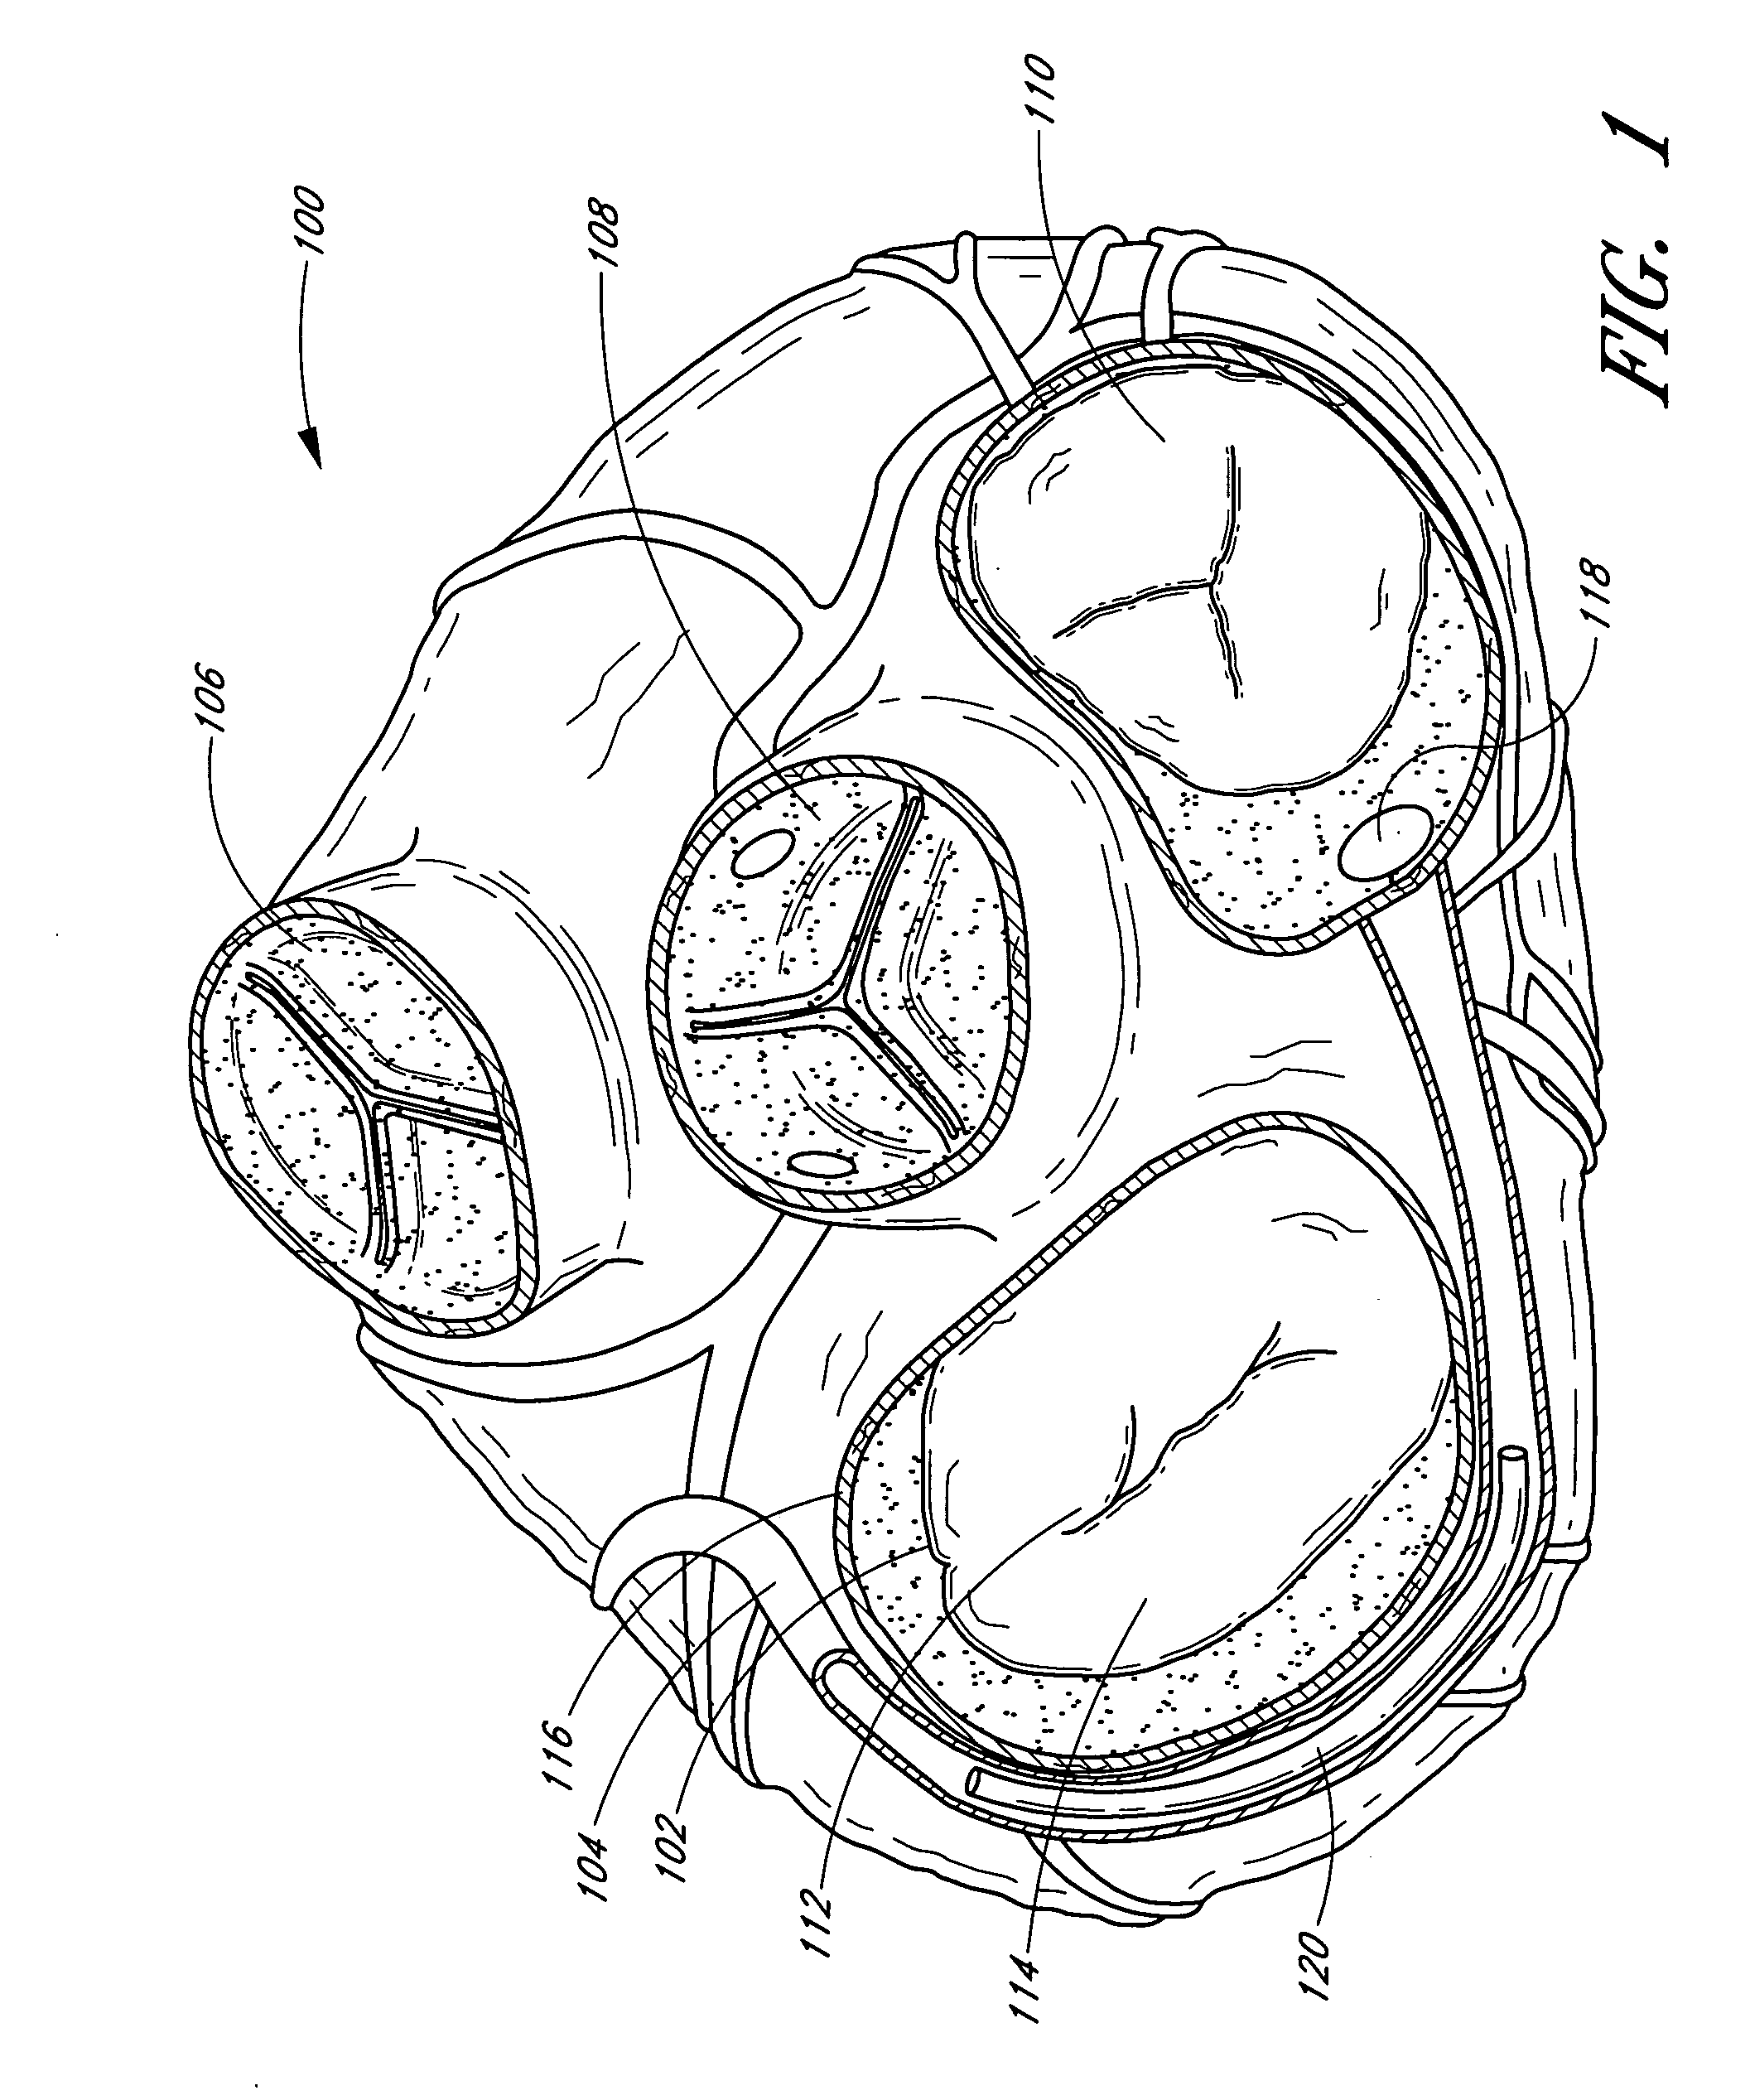 Dynamically adjustable implants and methods for reshaping tissue